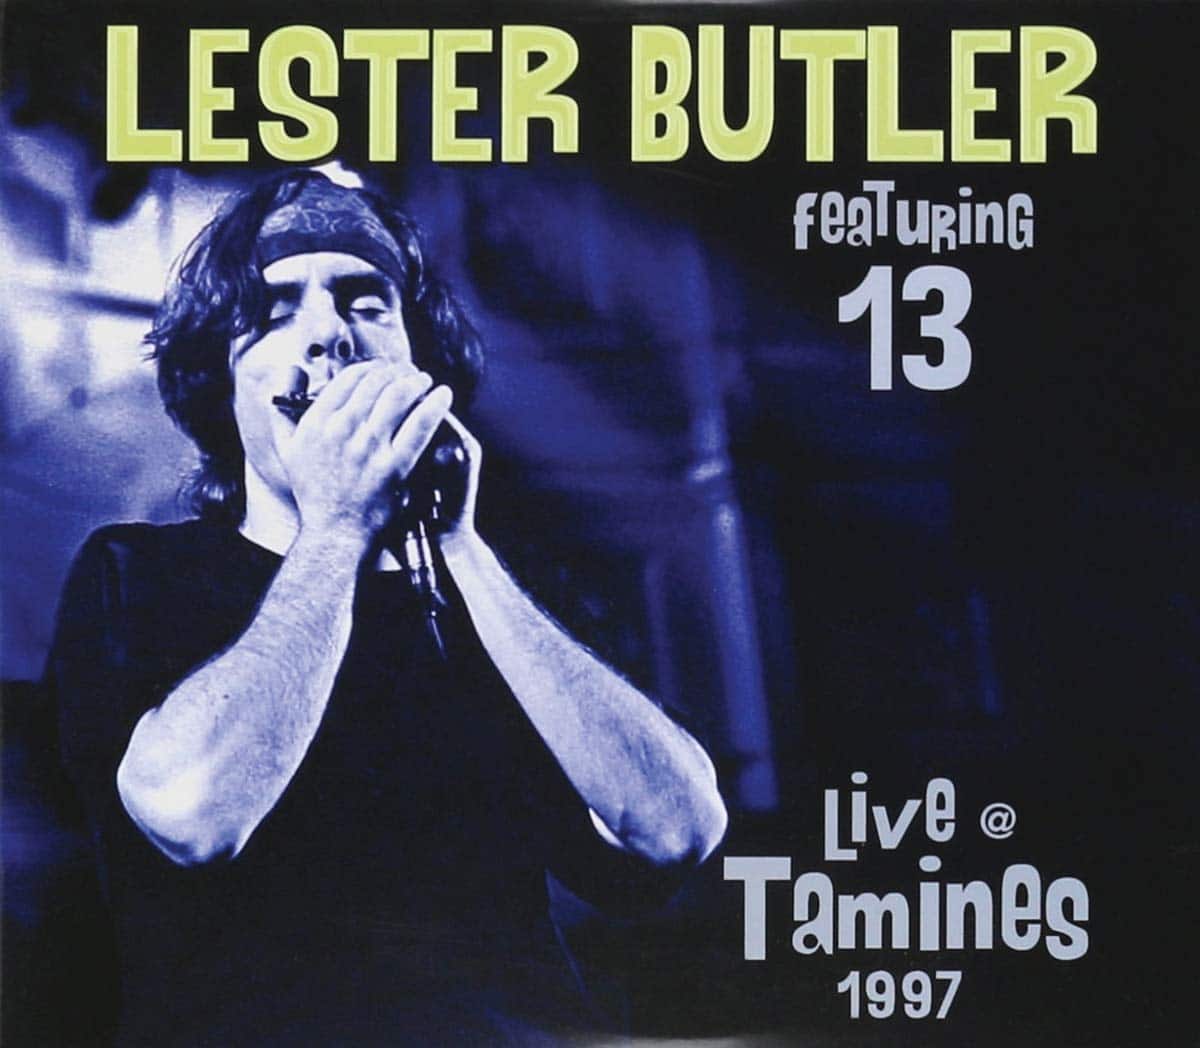 LESTER BUTLER Featuring 13 - Live @ Tamines 1997